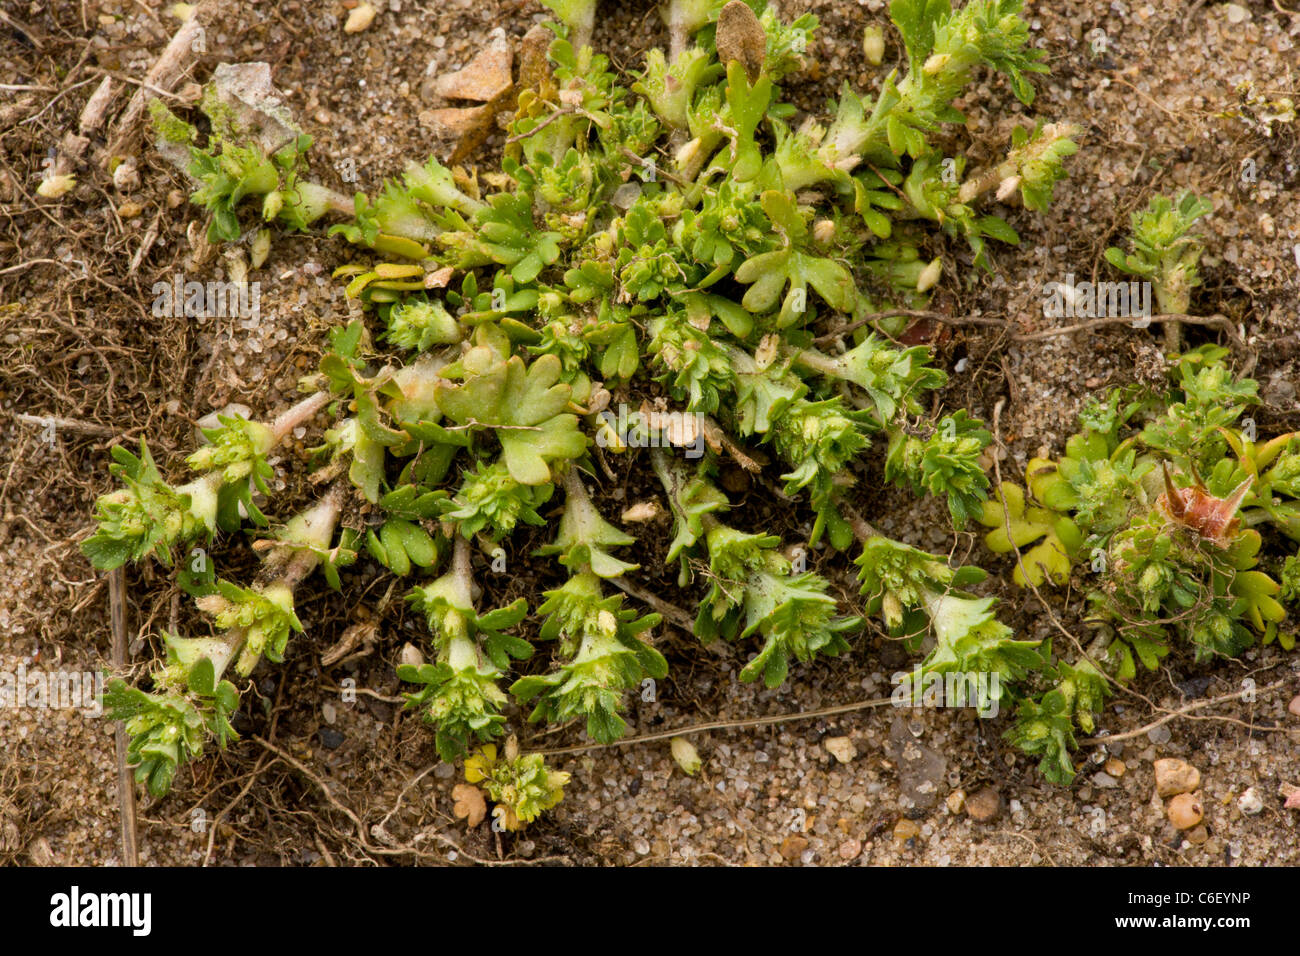 Parsley-piert Aphanes arvensis on sandy soil, Breckland area. Stock Photo